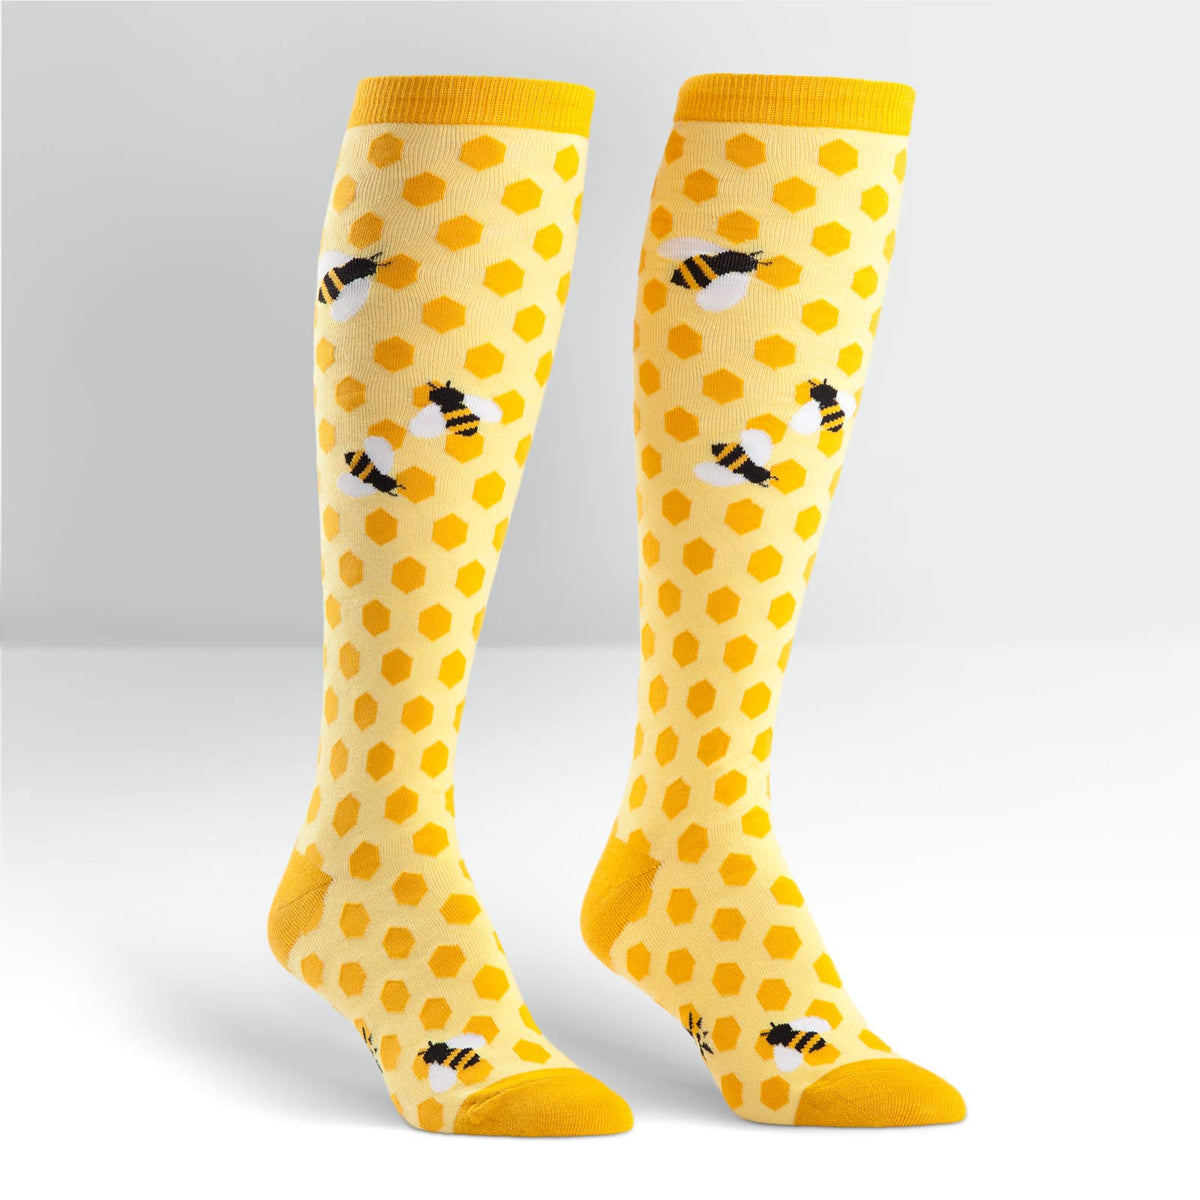 Sock It To Me women&#39;s knee high sock Bees KneesSock It To Me women&#39;s yellow knee high sock Bees Knees featuring honeycomb and bees all over on display feet